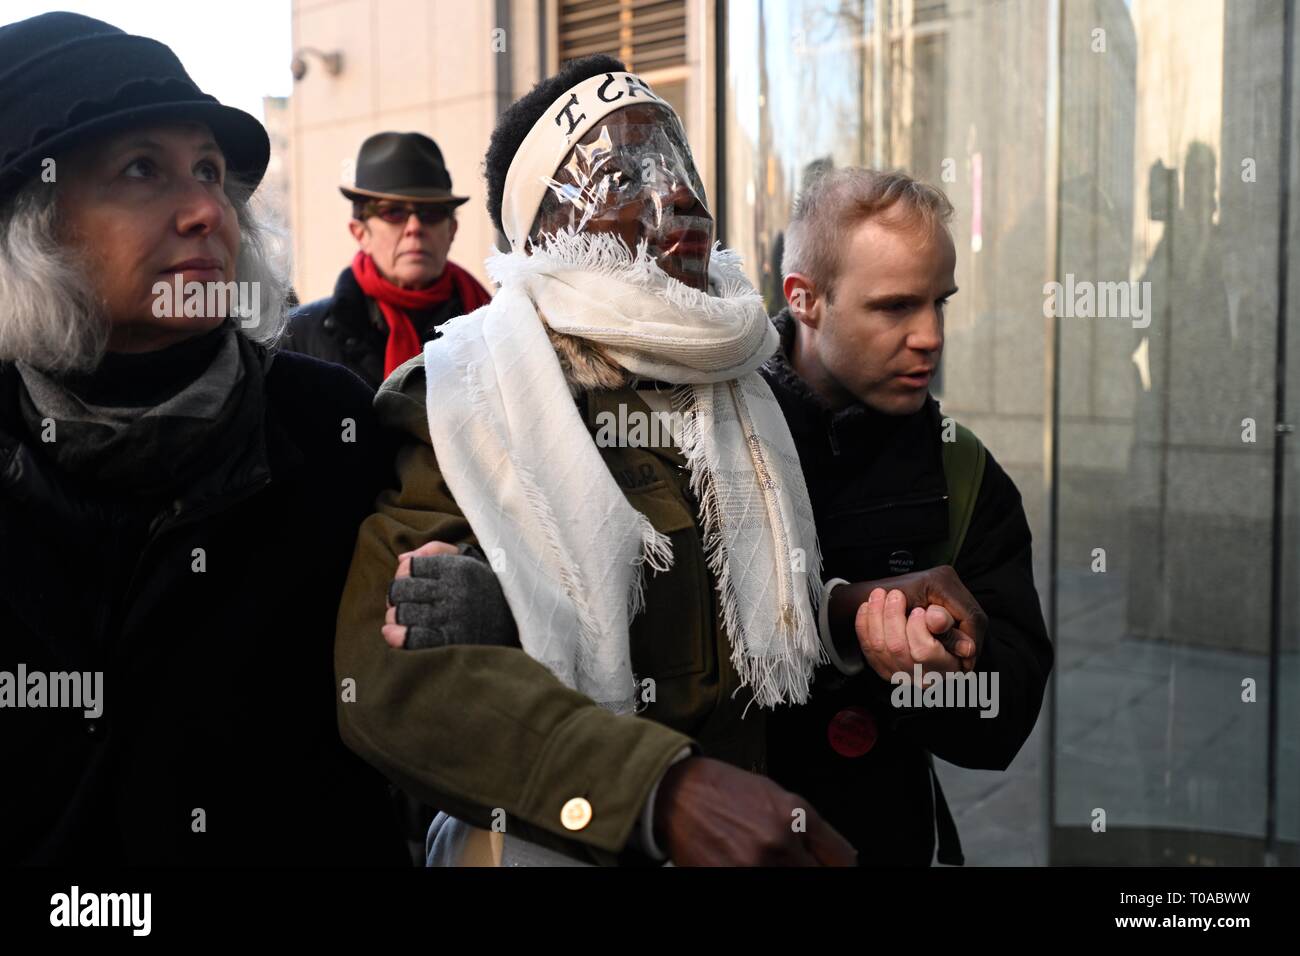 New York, NY, USA. 19th Mar 2019.  Supporters escort Statue of Liberty climber Patricia Okoumou, with clear plastic covering her face, into federal court before her sentencing for her July 4, 2018, act of civil disobedience to protest against Trump administration immigration policies.  Okoumou was convicted in December of misdemeanor charges of trespassing, disorderly conduct, and interfering with the functioning of government. Credit: Joseph Reid/Alamy Live News Stock Photo